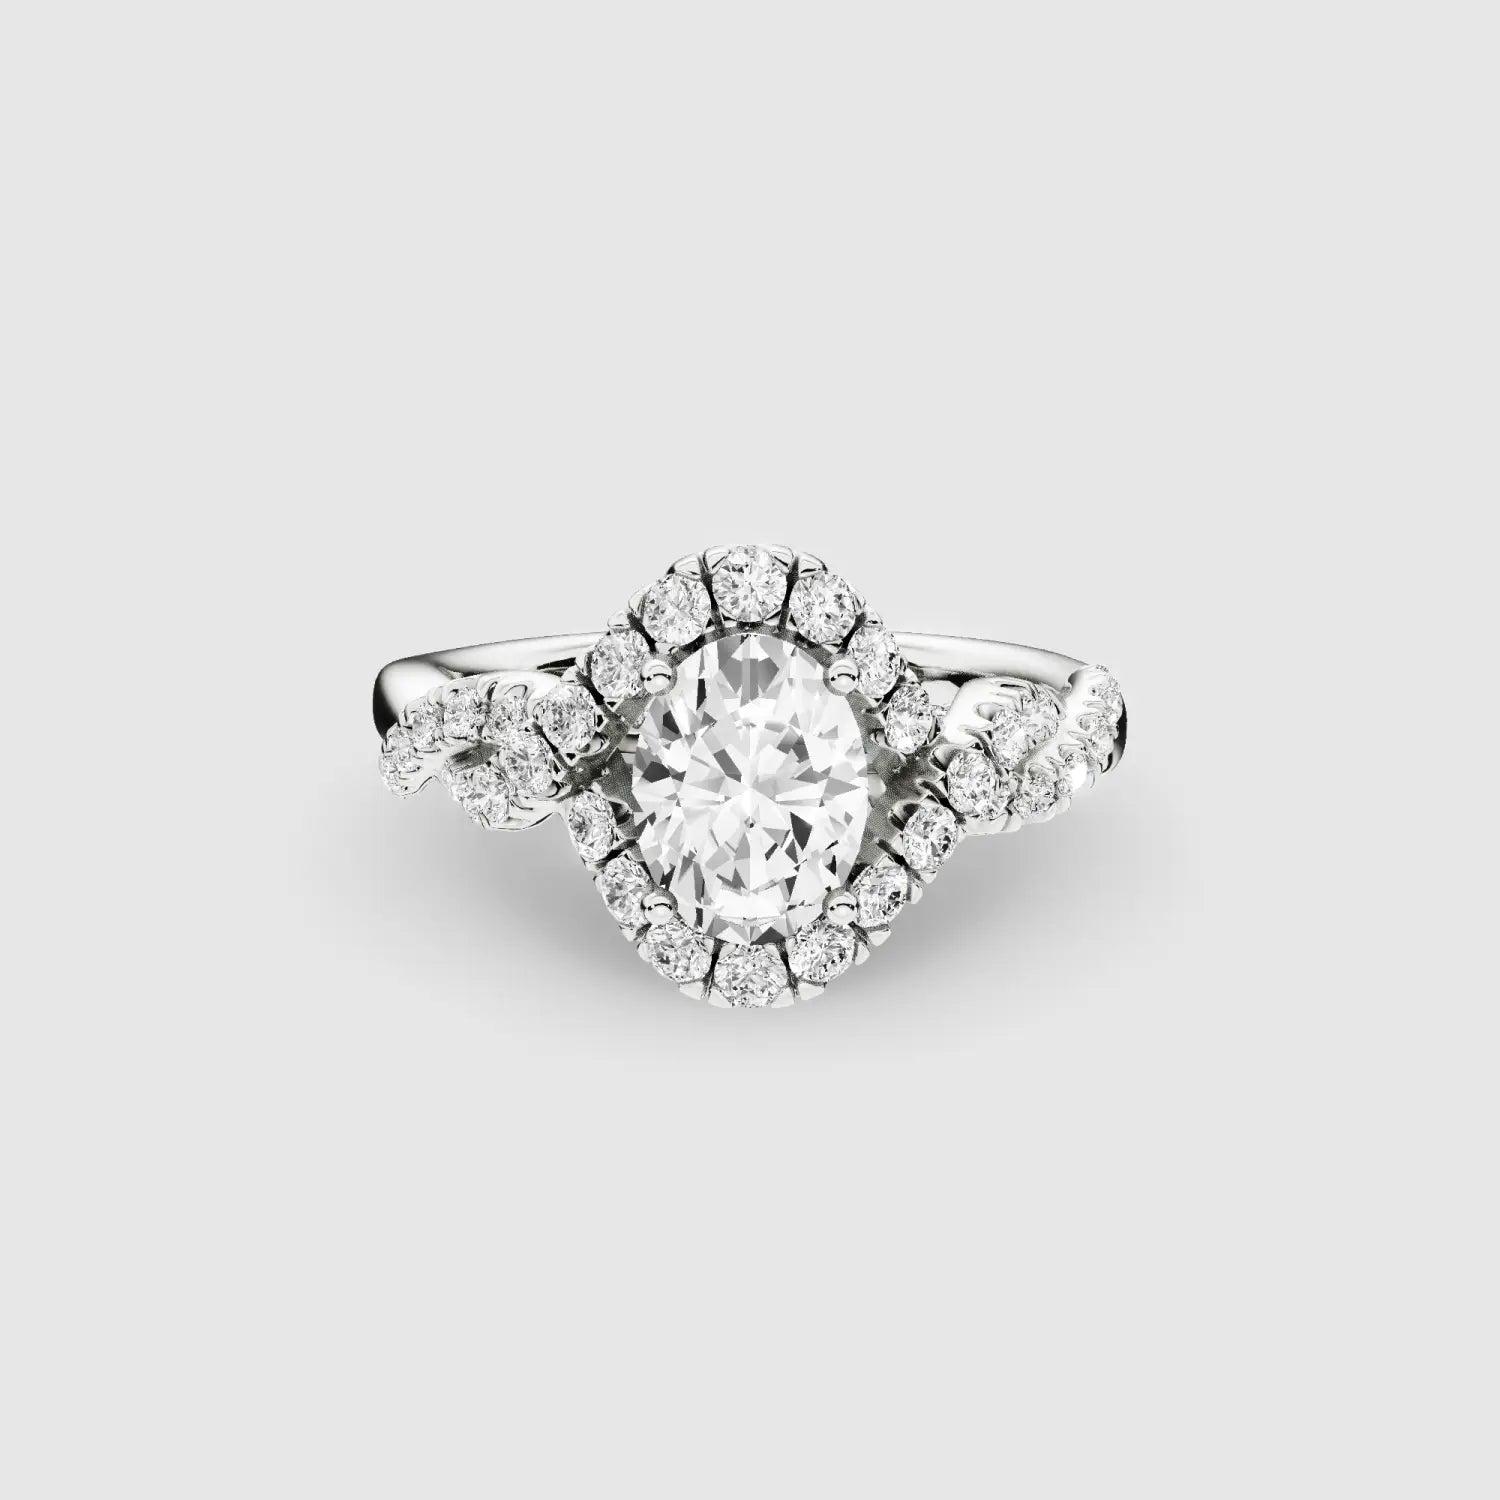 Engagement Rings for Every Kind of Bride